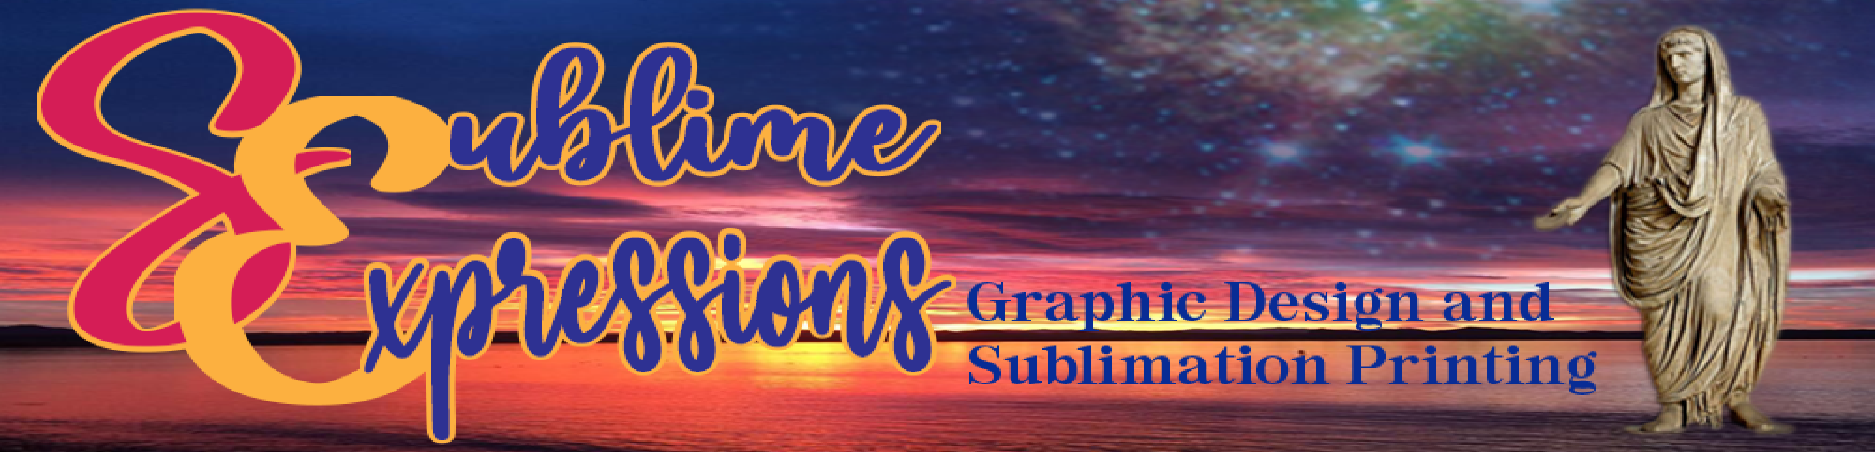 Sublime Expressions Graphic Design and Sublimation Printing Lake Wales Florida